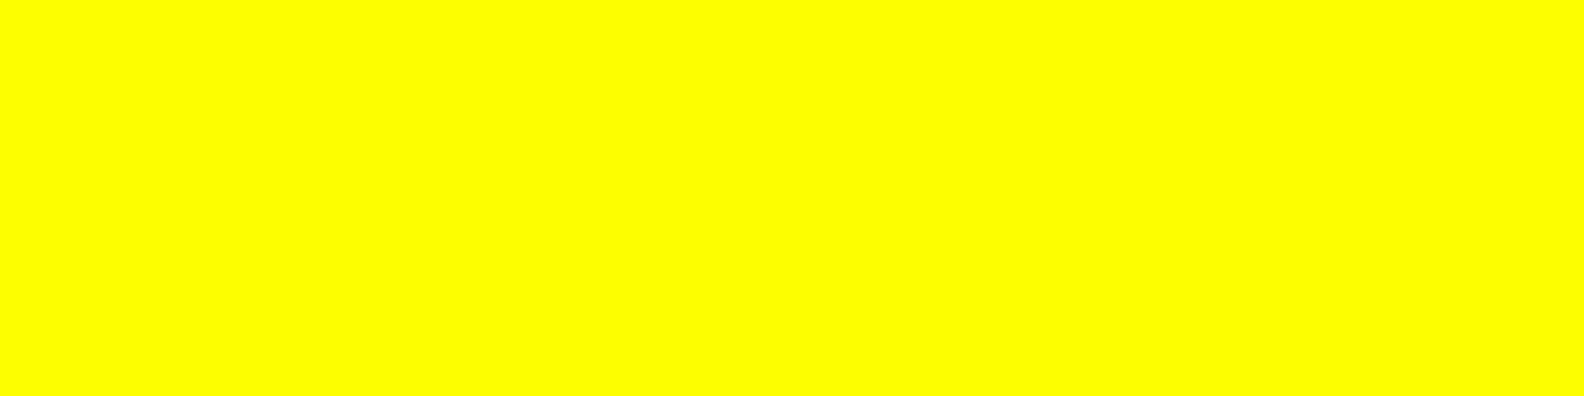 1584x396 Yellow Solid Color Background